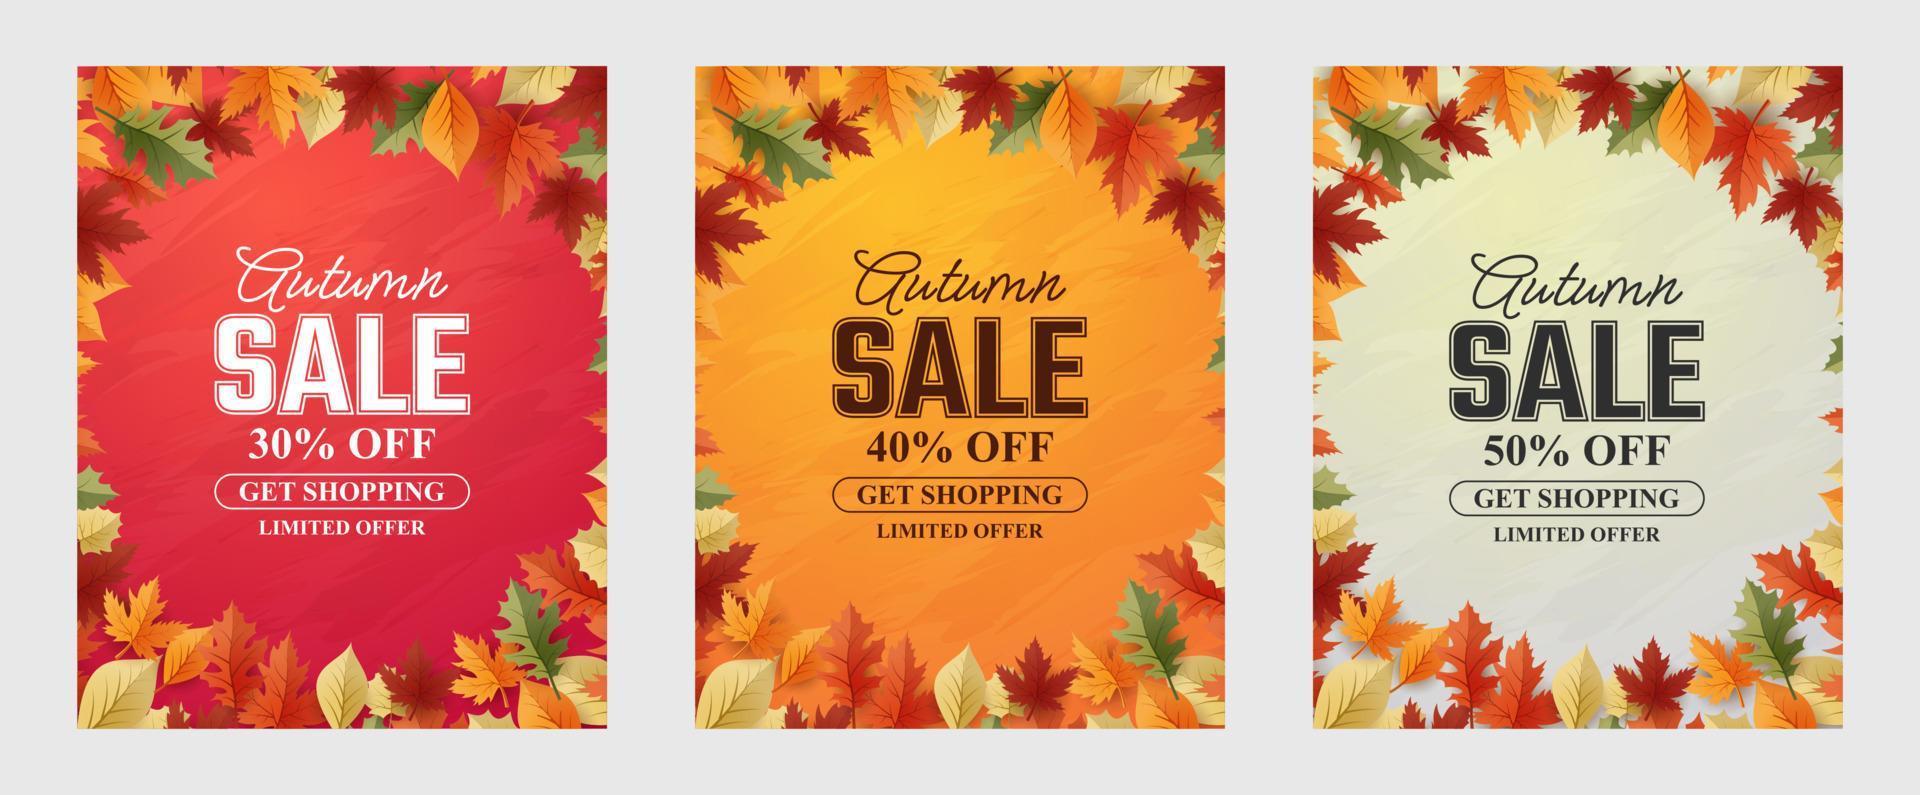 Autumn Sale Background, set of abstract backgrounds with leave frame, autumn sale, banner, posters, cover design templates, social media wallpaper stories vector